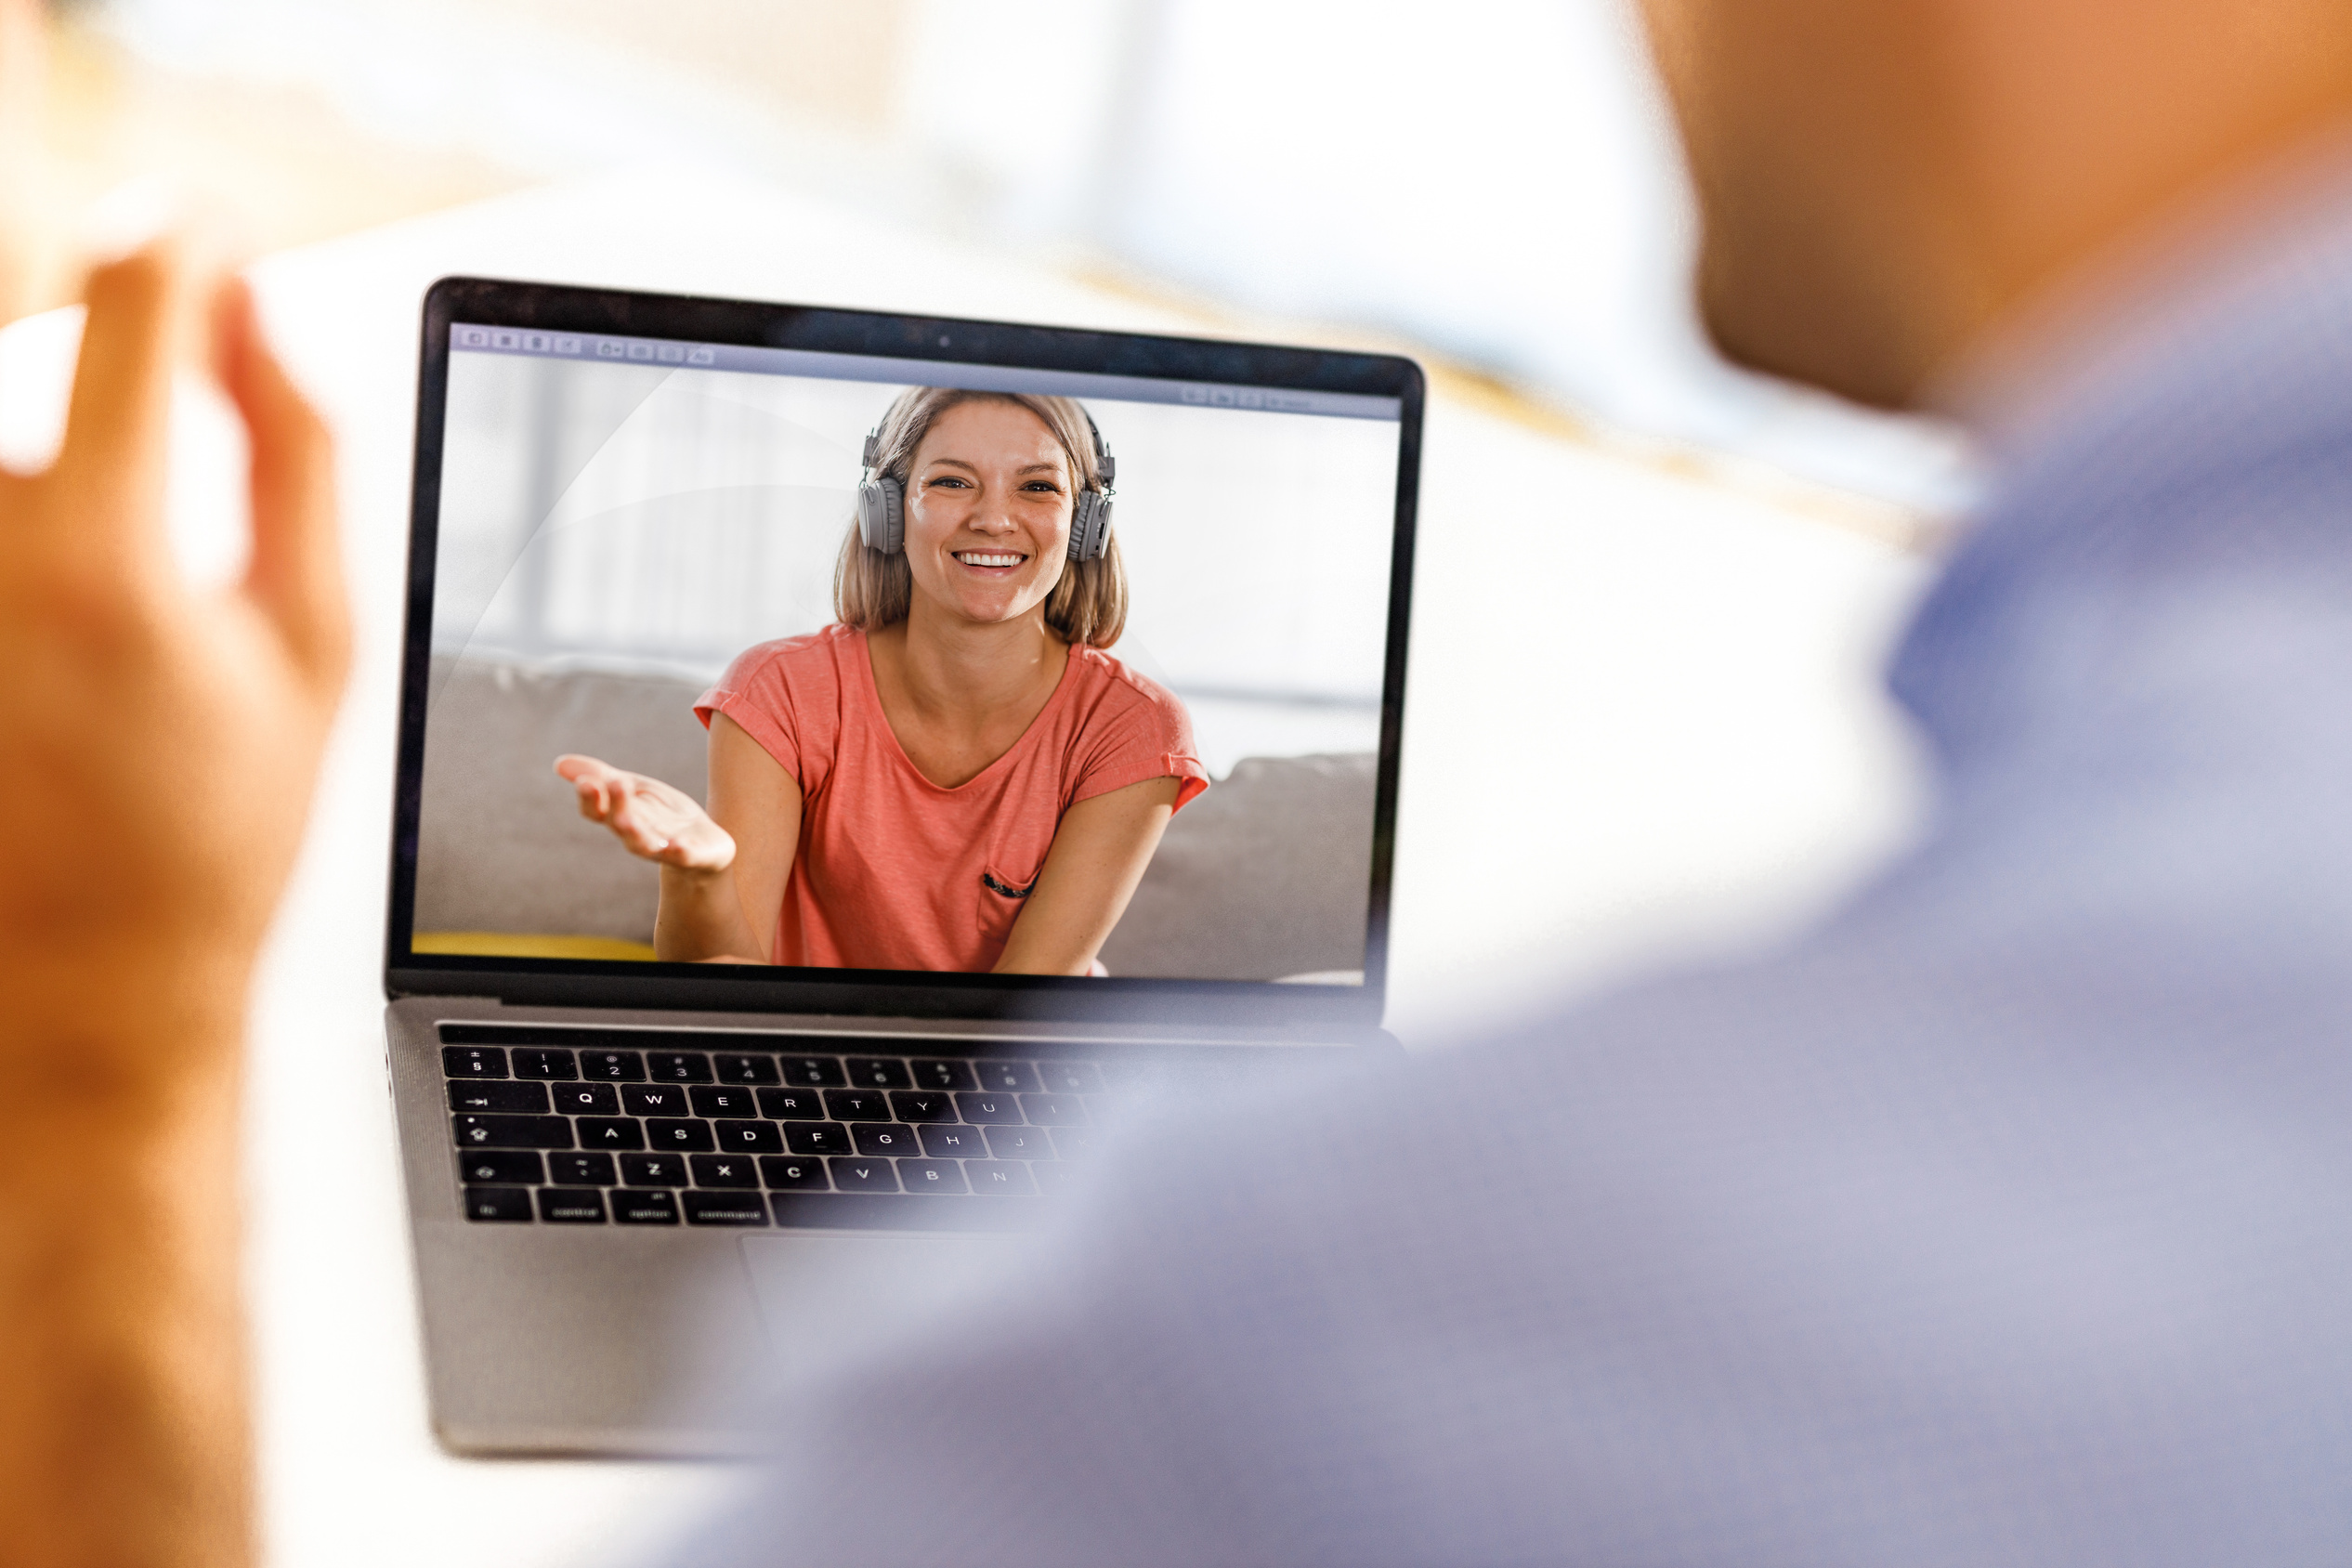 Long-distance relationship through video call!